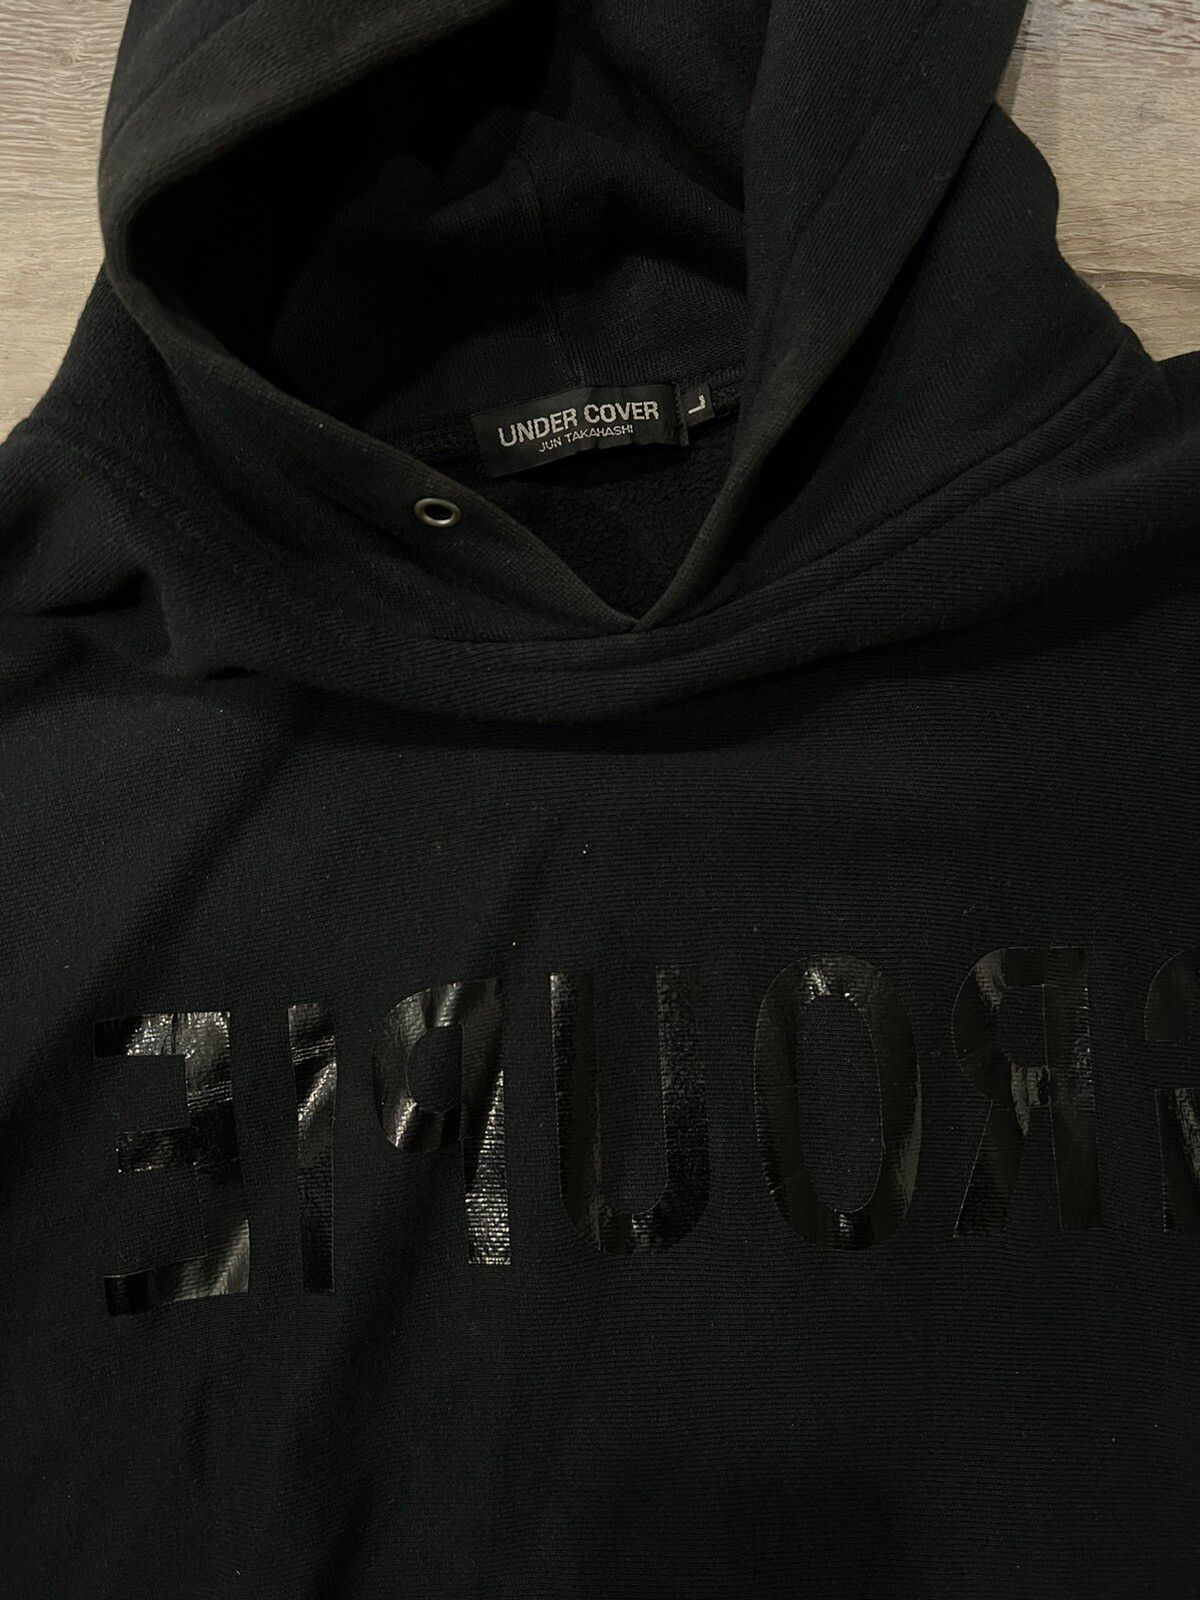 Undercover Undercover Groupie Hoodie Size US L / EU 52-54 / 3 - 2 Preview